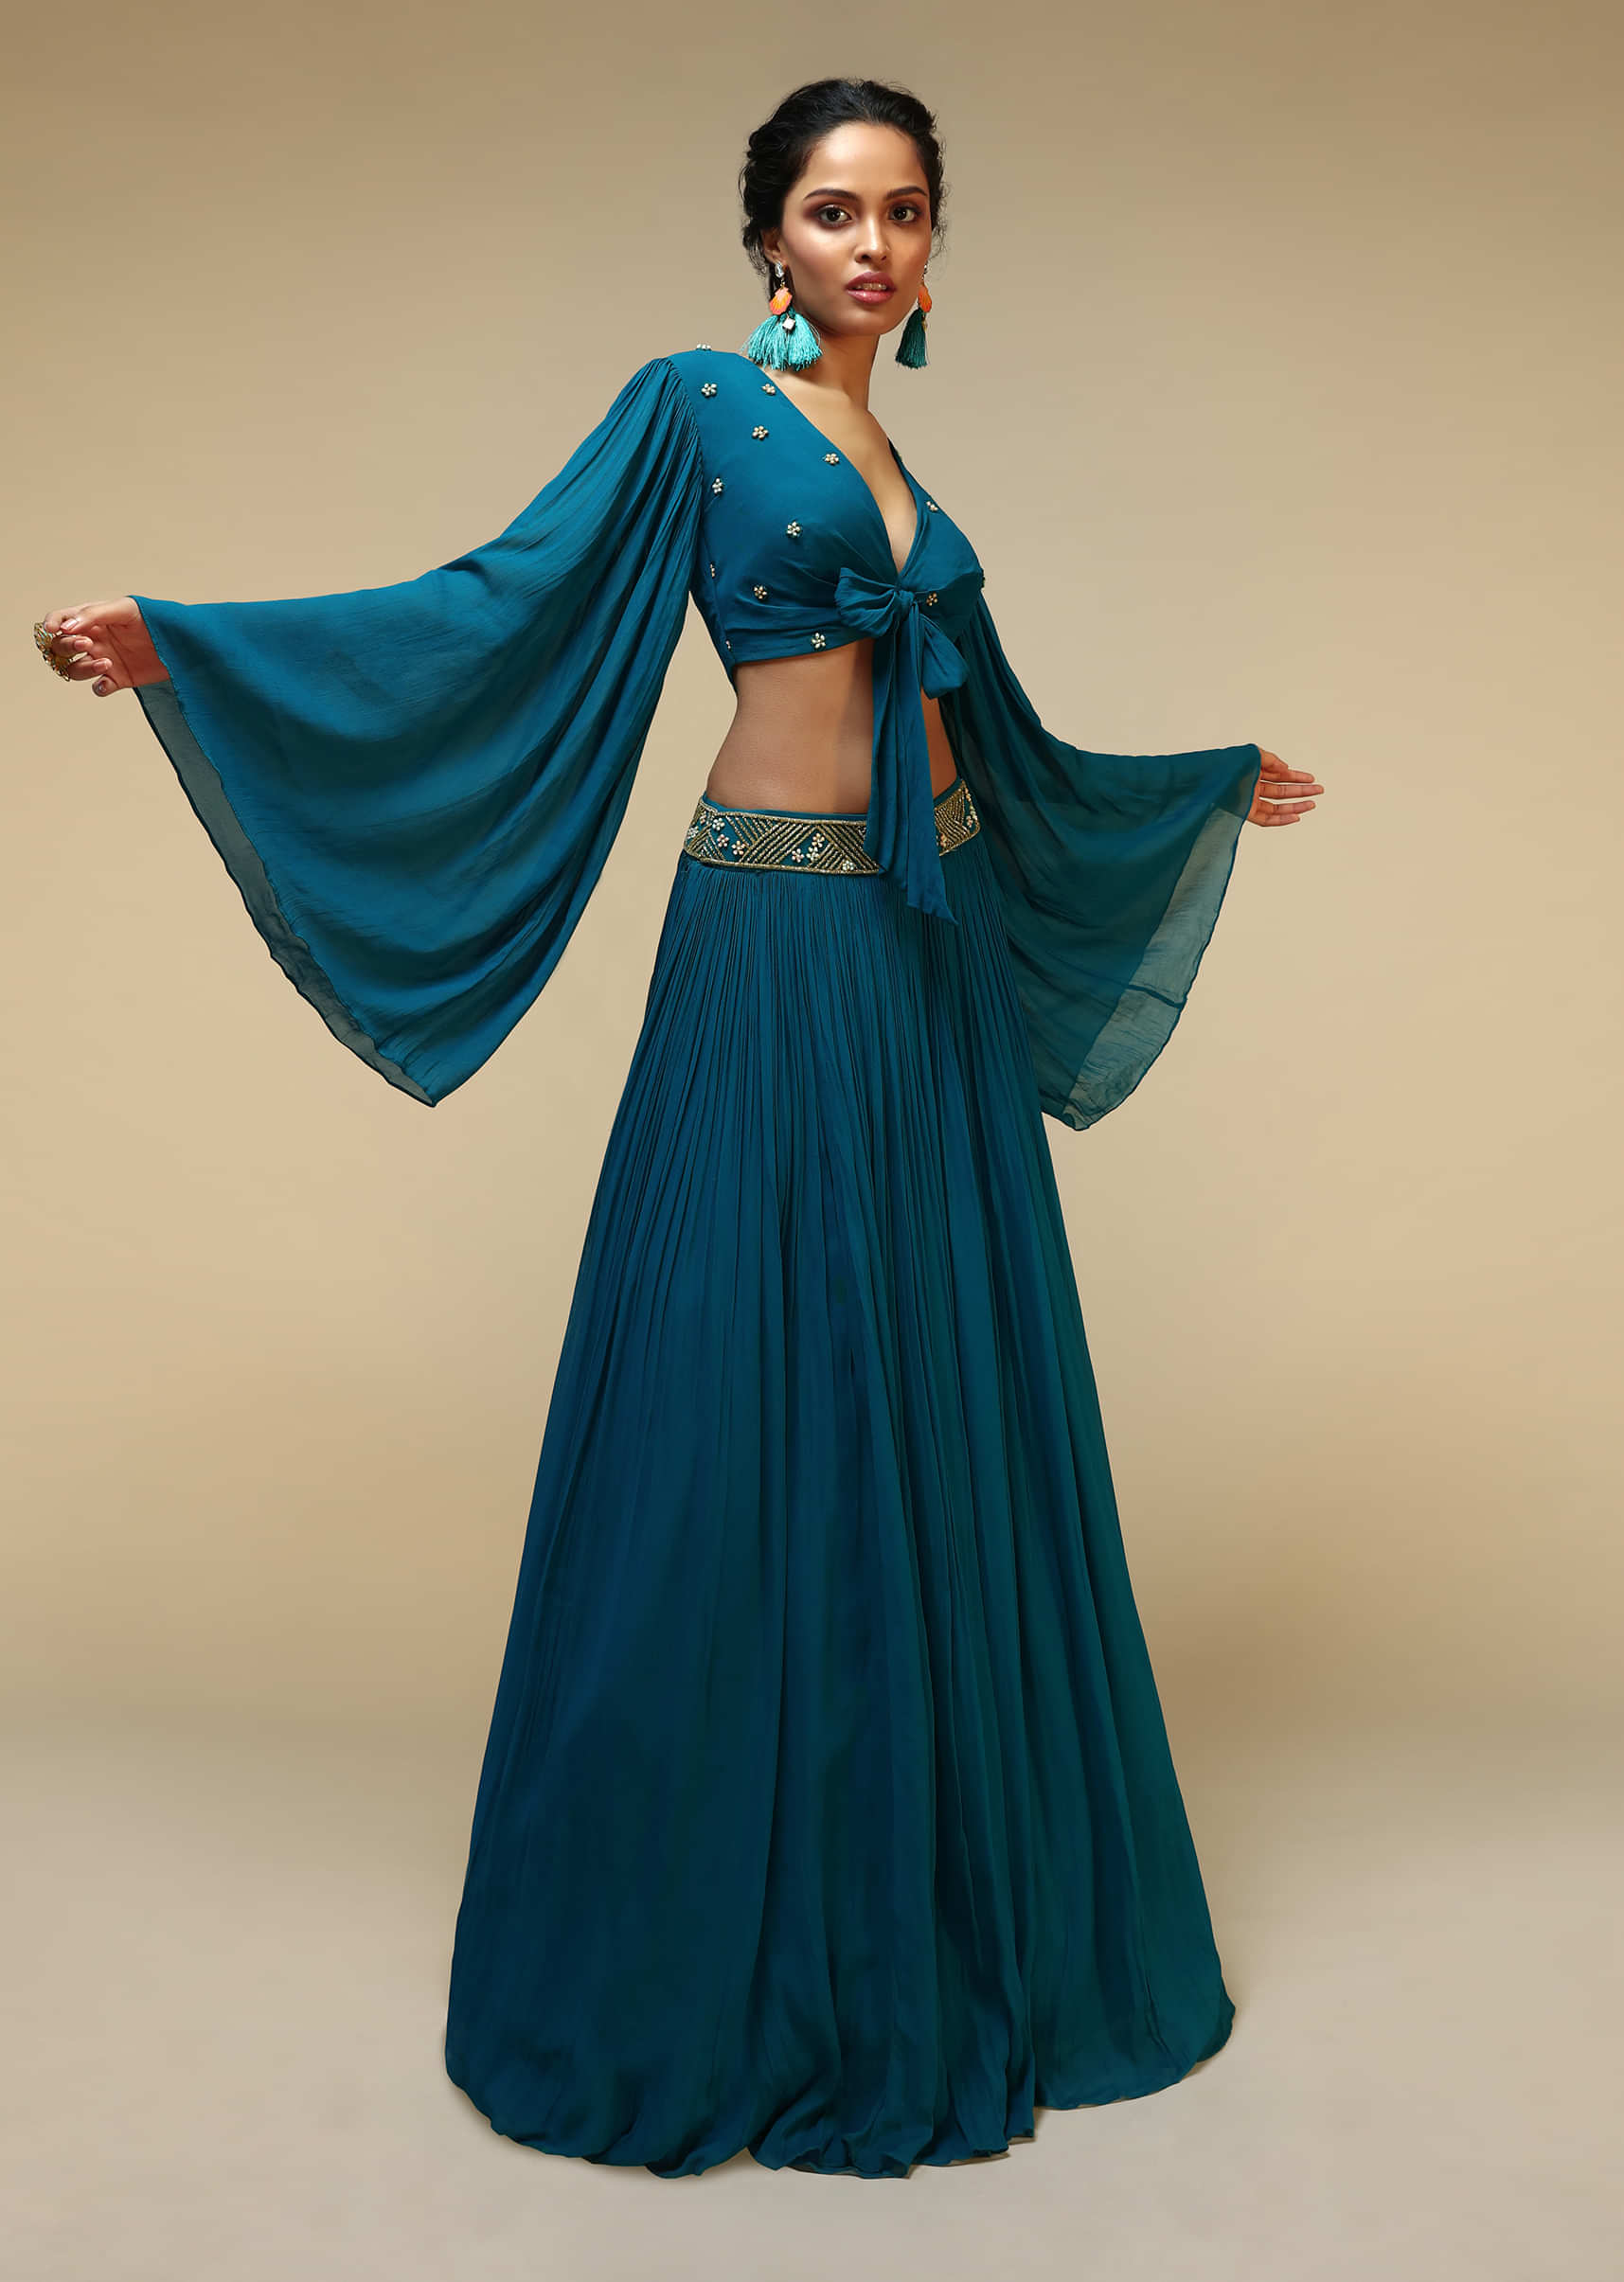 Teal Blue Skirt And Bell Sleeves Crop Top With Front Bow Tie Up Design And Multi Colored Sequin Embroidered Buttis 